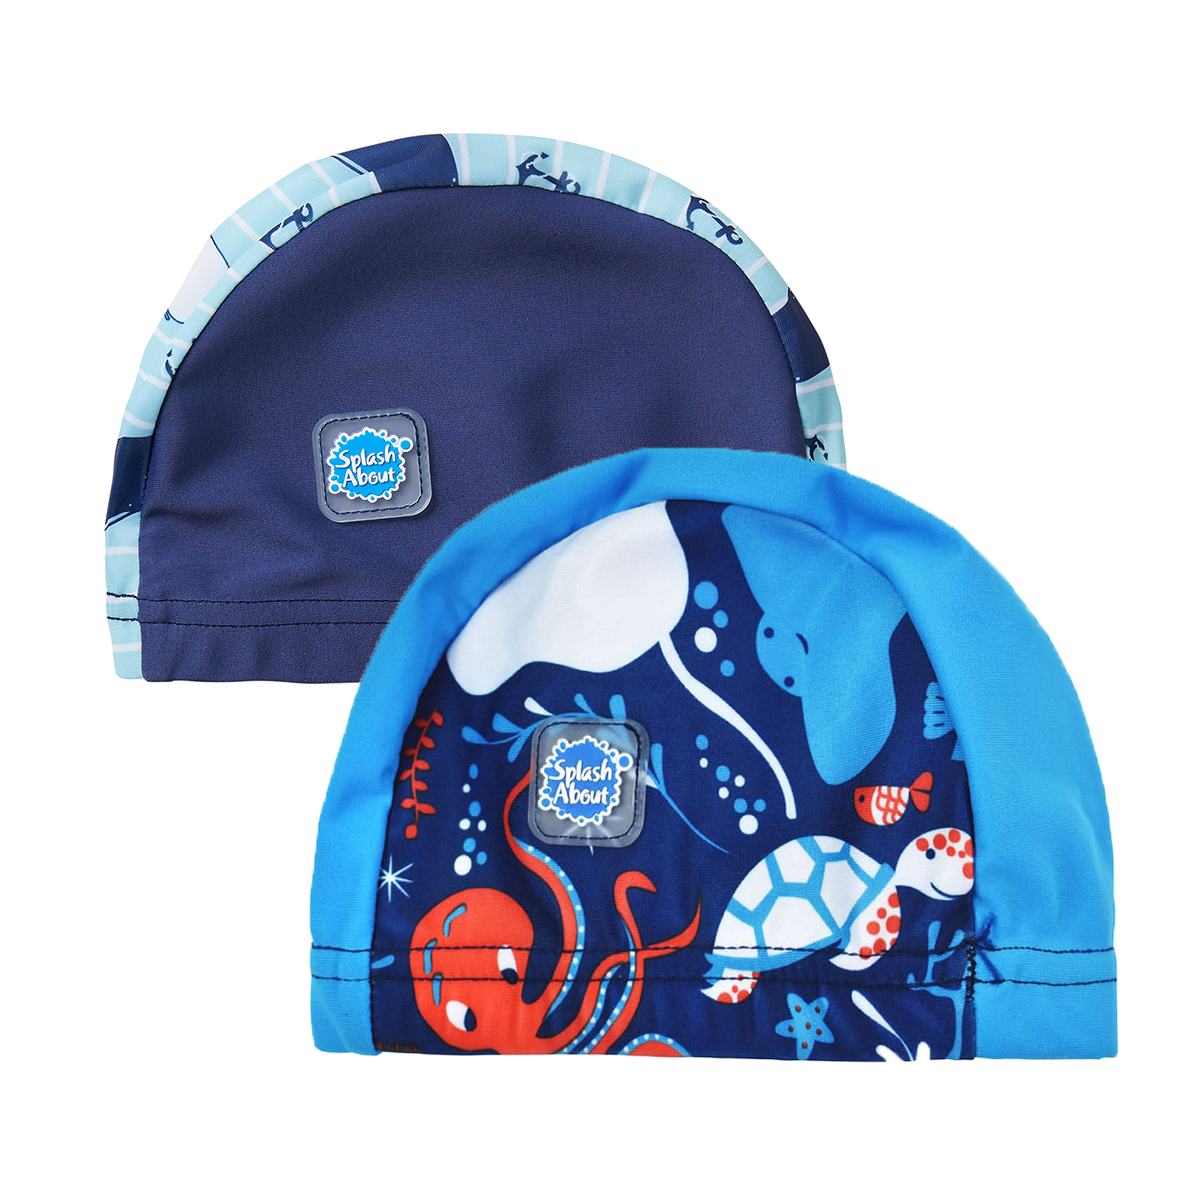 Pack of 2 swimming hats for babies and toddlers.